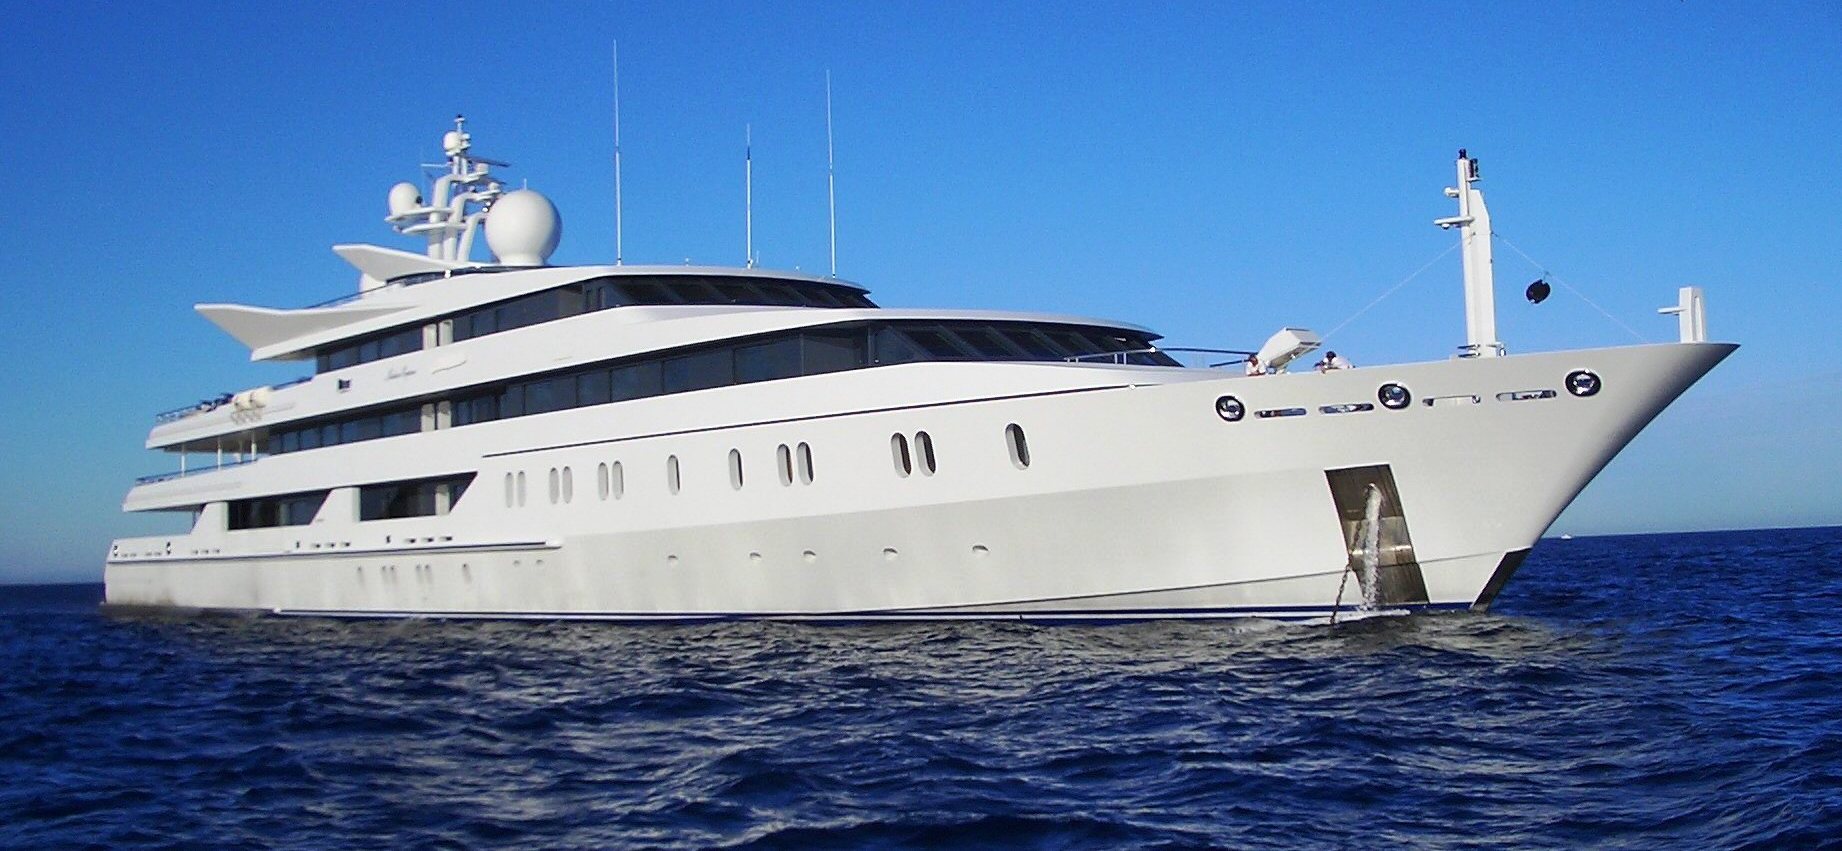 yacht manufacturers in india